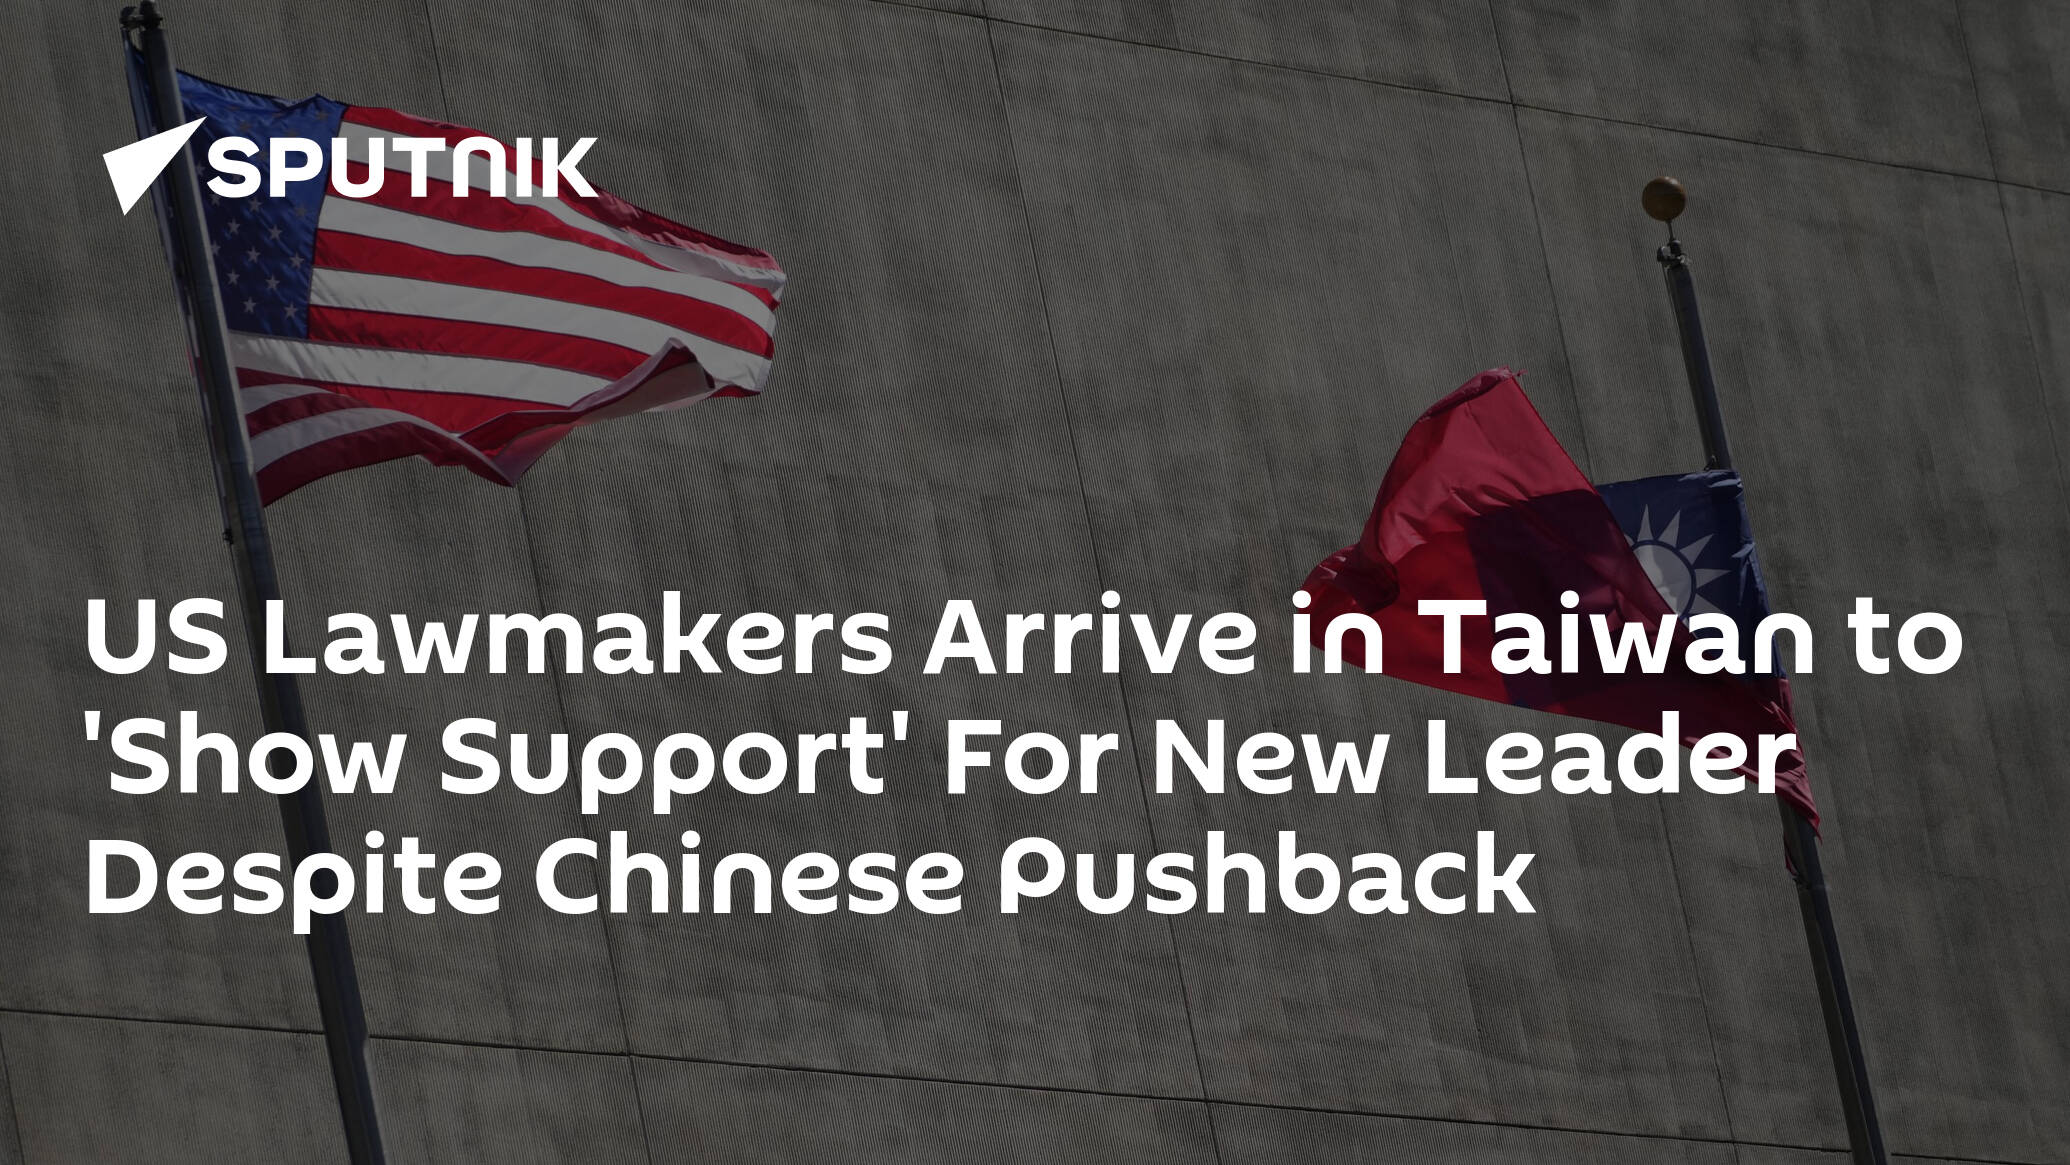 US Lawmakers Arrive in Taiwan to 'Show Support' For New Leader Despite Chinese Pushback